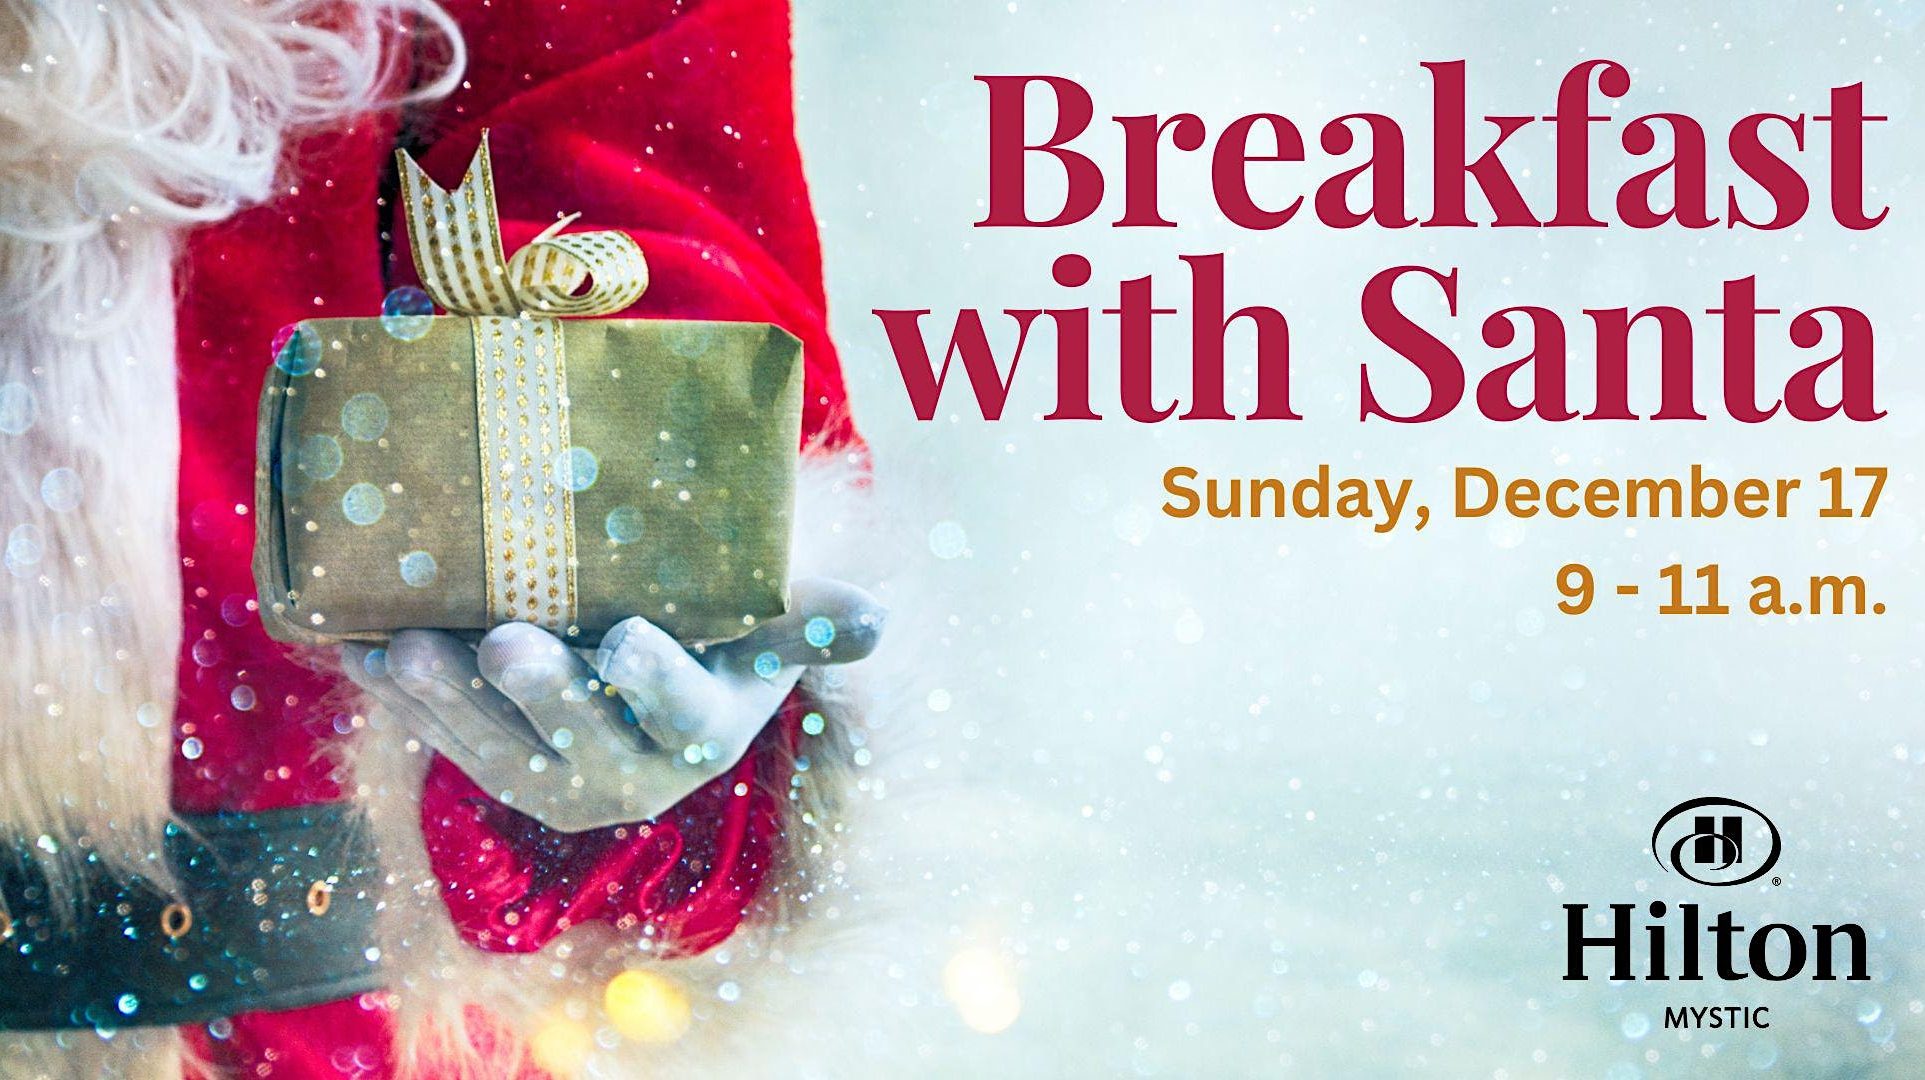 Breakfast with Santa at the Mystic Hilton